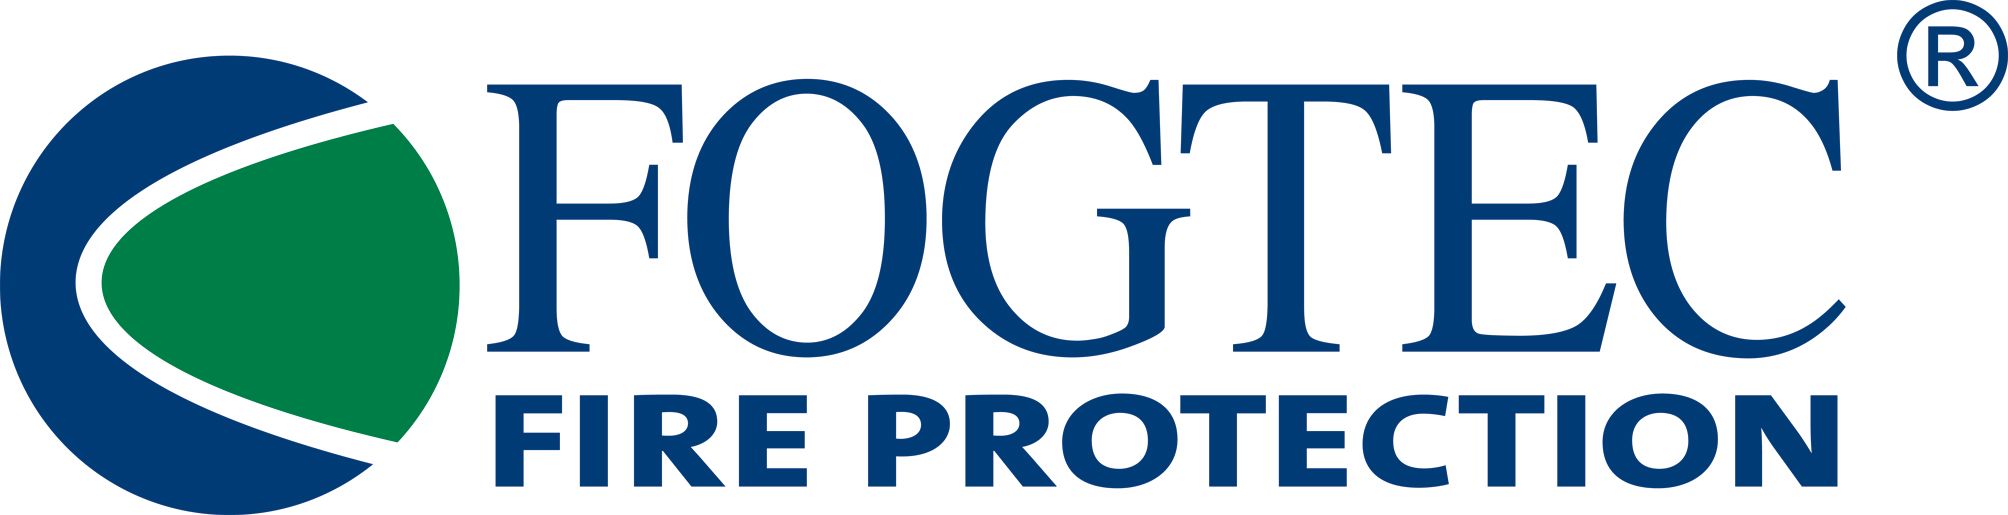 Fogtec Fire Protection